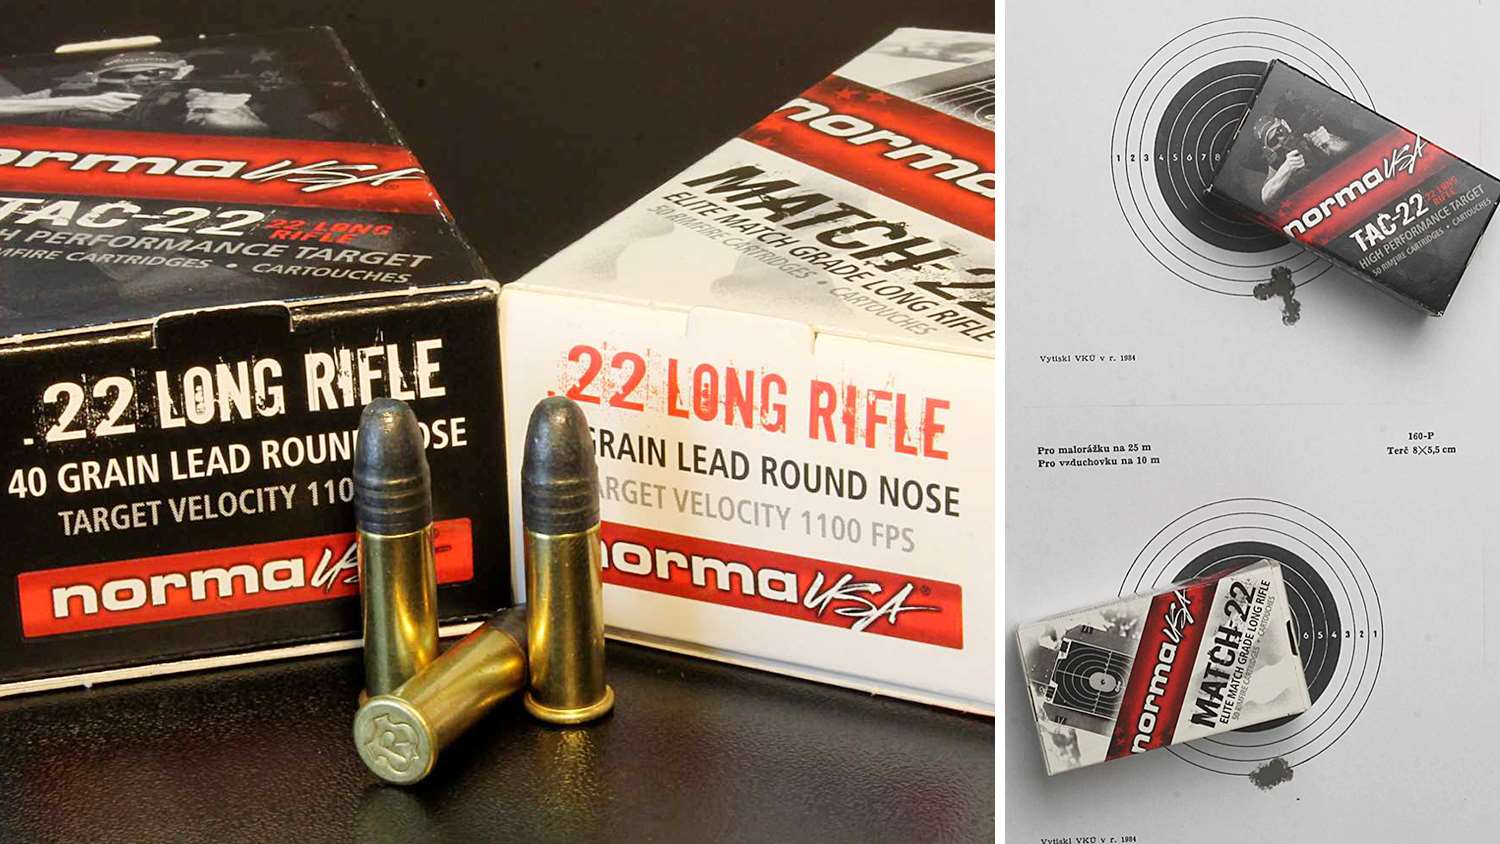 Norma-USA&#x27;s TAC-22 and Match-22 ammo